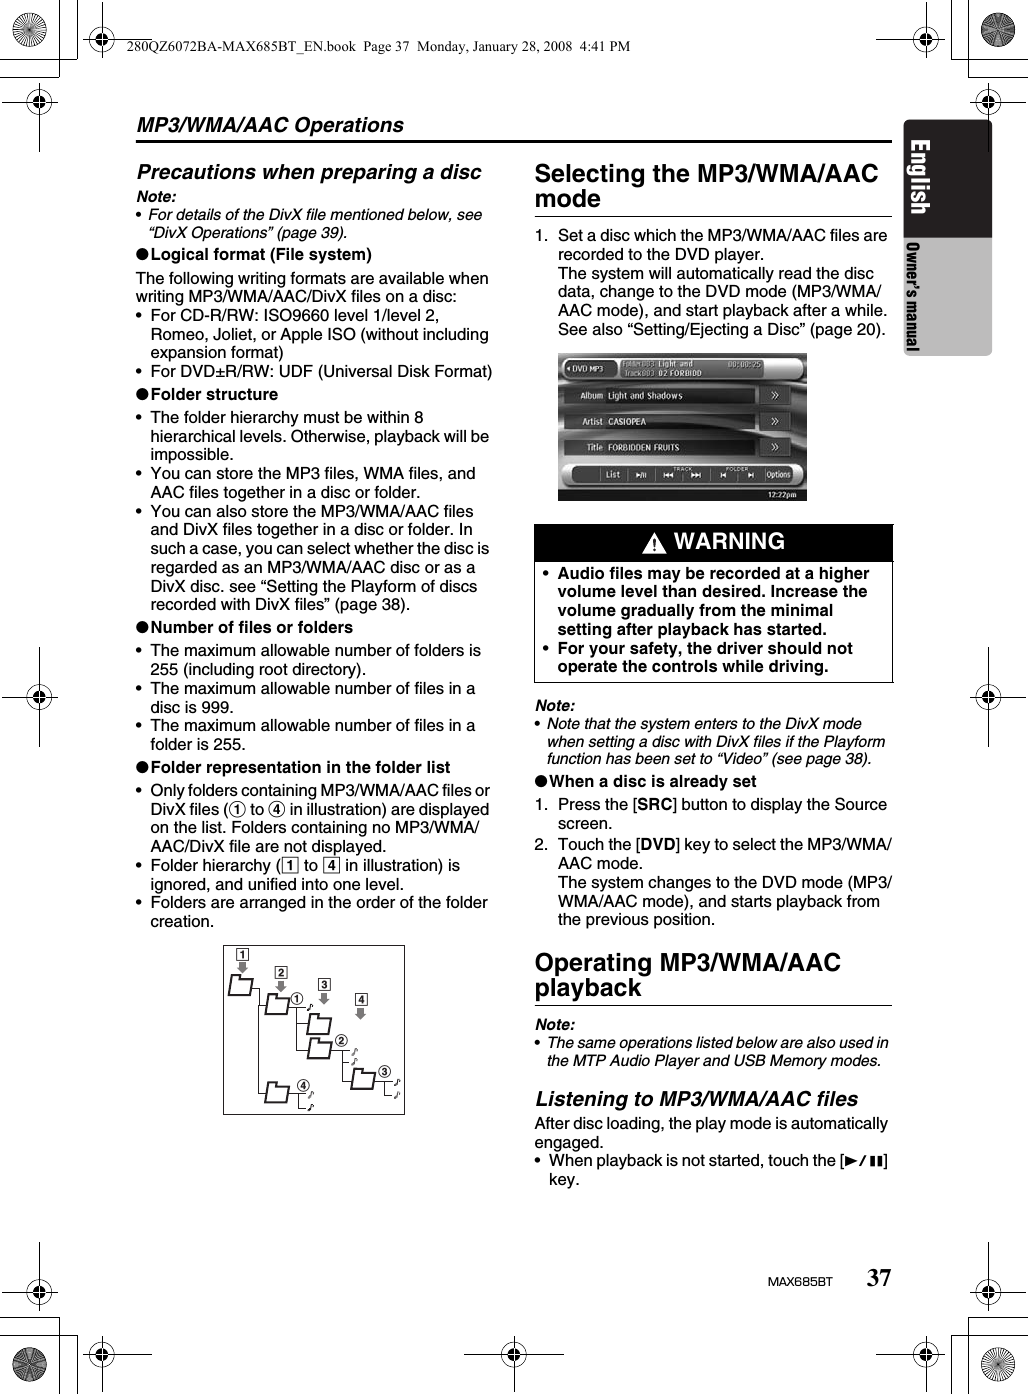 MP3/WMA/AAC Operations37MAX685BTEnglish Owner’s manualPrecautions when preparing a discNote:•For details of the DivX file mentioned below, see “DivX Operations” (page 39).●Logical format (File system)The following writing formats are available when writing MP3/WMA/AAC/DivX files on a disc:• For CD-R/RW: ISO9660 level 1/level 2, Romeo, Joliet, or Apple ISO (without including expansion format)• For DVD±R/RW: UDF (Universal Disk Format)●Folder structure• The folder hierarchy must be within 8 hierarchical levels. Otherwise, playback will be impossible.• You can store the MP3 files, WMA files, and AAC files together in a disc or folder.• You can also store the MP3/WMA/AAC files and DivX files together in a disc or folder. In such a case, you can select whether the disc is regarded as an MP3/WMA/AAC disc or as a DivX disc. see “Setting the Playform of discs recorded with DivX files” (page 38).●Number of files or folders• The maximum allowable number of folders is 255 (including root directory).• The maximum allowable number of files in a disc is 999.• The maximum allowable number of files in a folder is 255.●Folder representation in the folder list• Only folders containing MP3/WMA/AAC files or DivX files (1 to 4 in illustration) are displayed on the list. Folders containing no MP3/WMA/AAC/DivX file are not displayed.• Folder hierarchy (1 to 4 in illustration) is ignored, and unified into one level.• Folders are arranged in the order of the folder creation.Selecting the MP3/WMA/AAC mode1. Set a disc which the MP3/WMA/AAC files are recorded to the DVD player.The system will automatically read the disc data, change to the DVD mode (MP3/WMA/AAC mode), and start playback after a while.See also “Setting/Ejecting a Disc” (page 20).Note:•Note that the system enters to the DivX mode when setting a disc with DivX files if the Playform function has been set to “Video” (see page 38).●When a disc is already set1. Press the [SRC] button to display the Source screen.2. Touch the [DVD] key to select the MP3/WMA/AAC mode.The system changes to the DVD mode (MP3/WMA/AAC mode), and starts playback from the previous position.Operating MP3/WMA/AAC playbackNote:•The same operations listed below are also used in the MTP Audio Player and USB Memory modes.Listening to MP3/WMA/AAC filesAfter disc loading, the play mode is automatically engaged.• When playback is not started, touch the [p] key.12123434 WARNING•Audio files may be recorded at a higher volume level than desired. Increase the volume gradually from the minimal setting after playback has started.•For your safety, the driver should not operate the controls while driving.280QZ6072BA-MAX685BT_EN.book  Page 37  Monday, January 28, 2008  4:41 PM